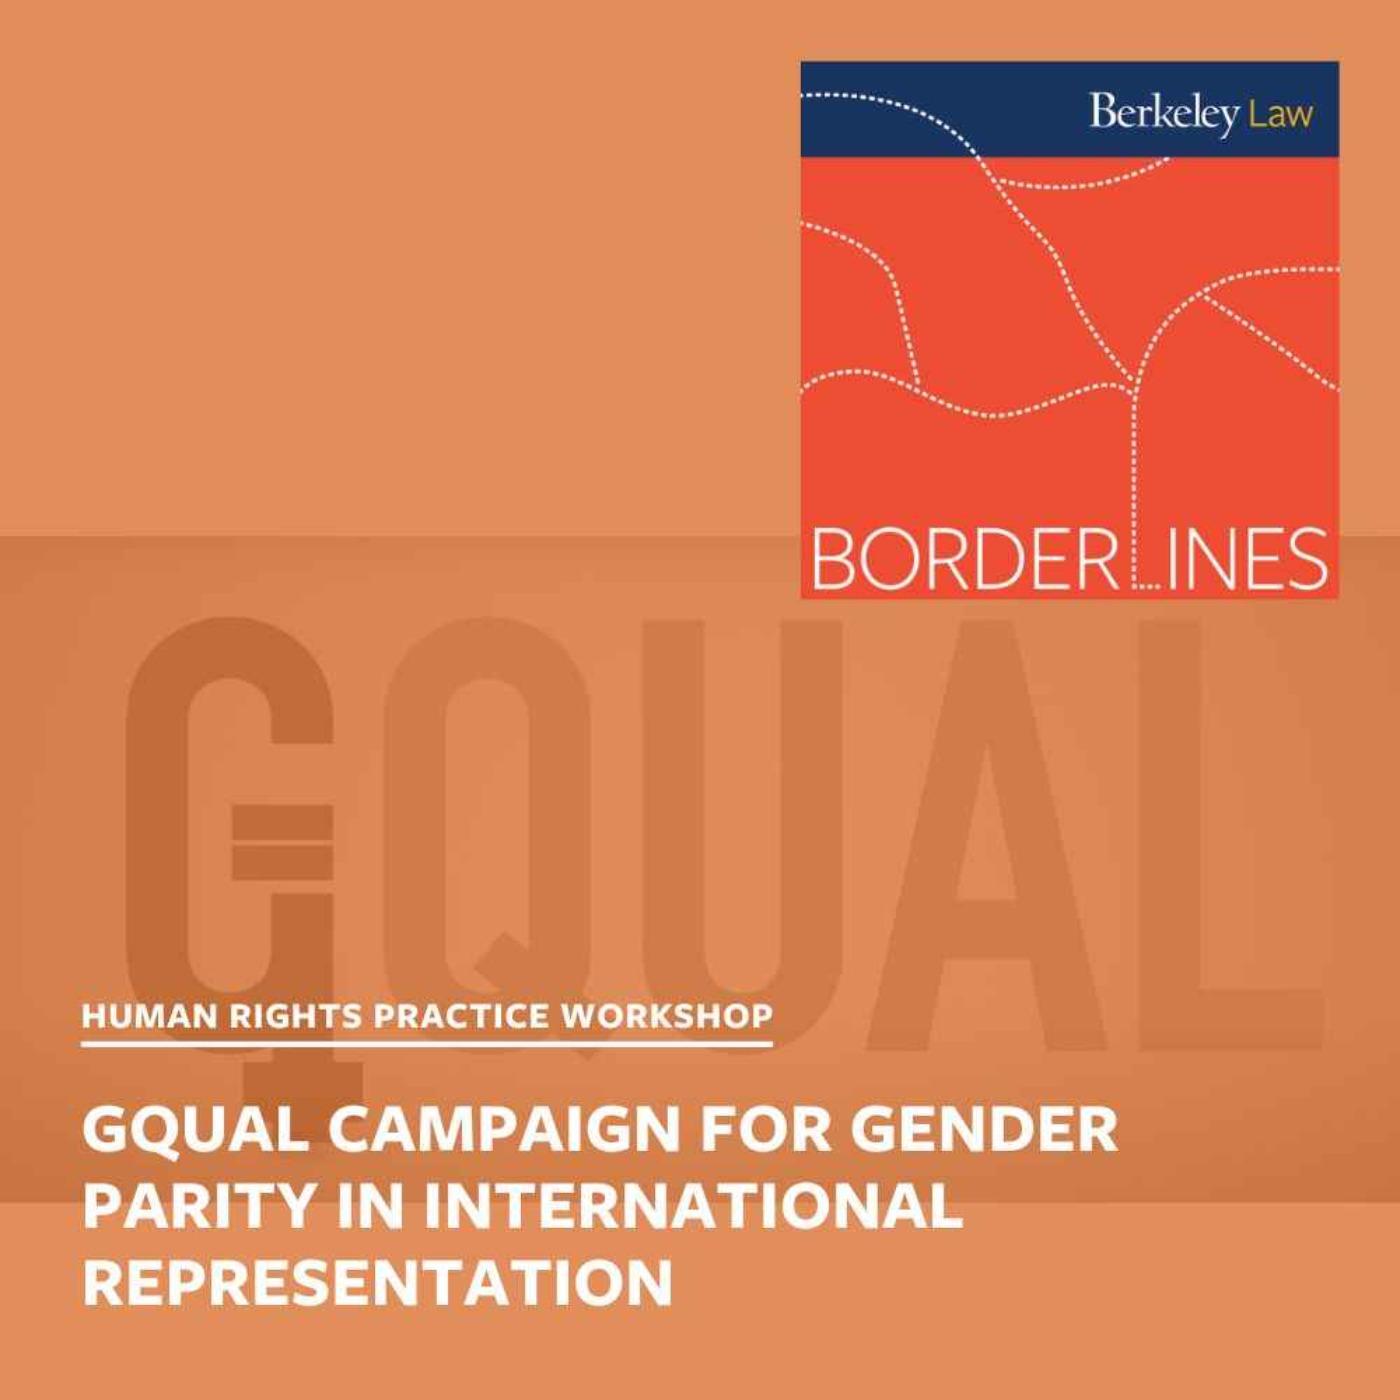 GQUAL Campaign for Gender Parity in International Representation